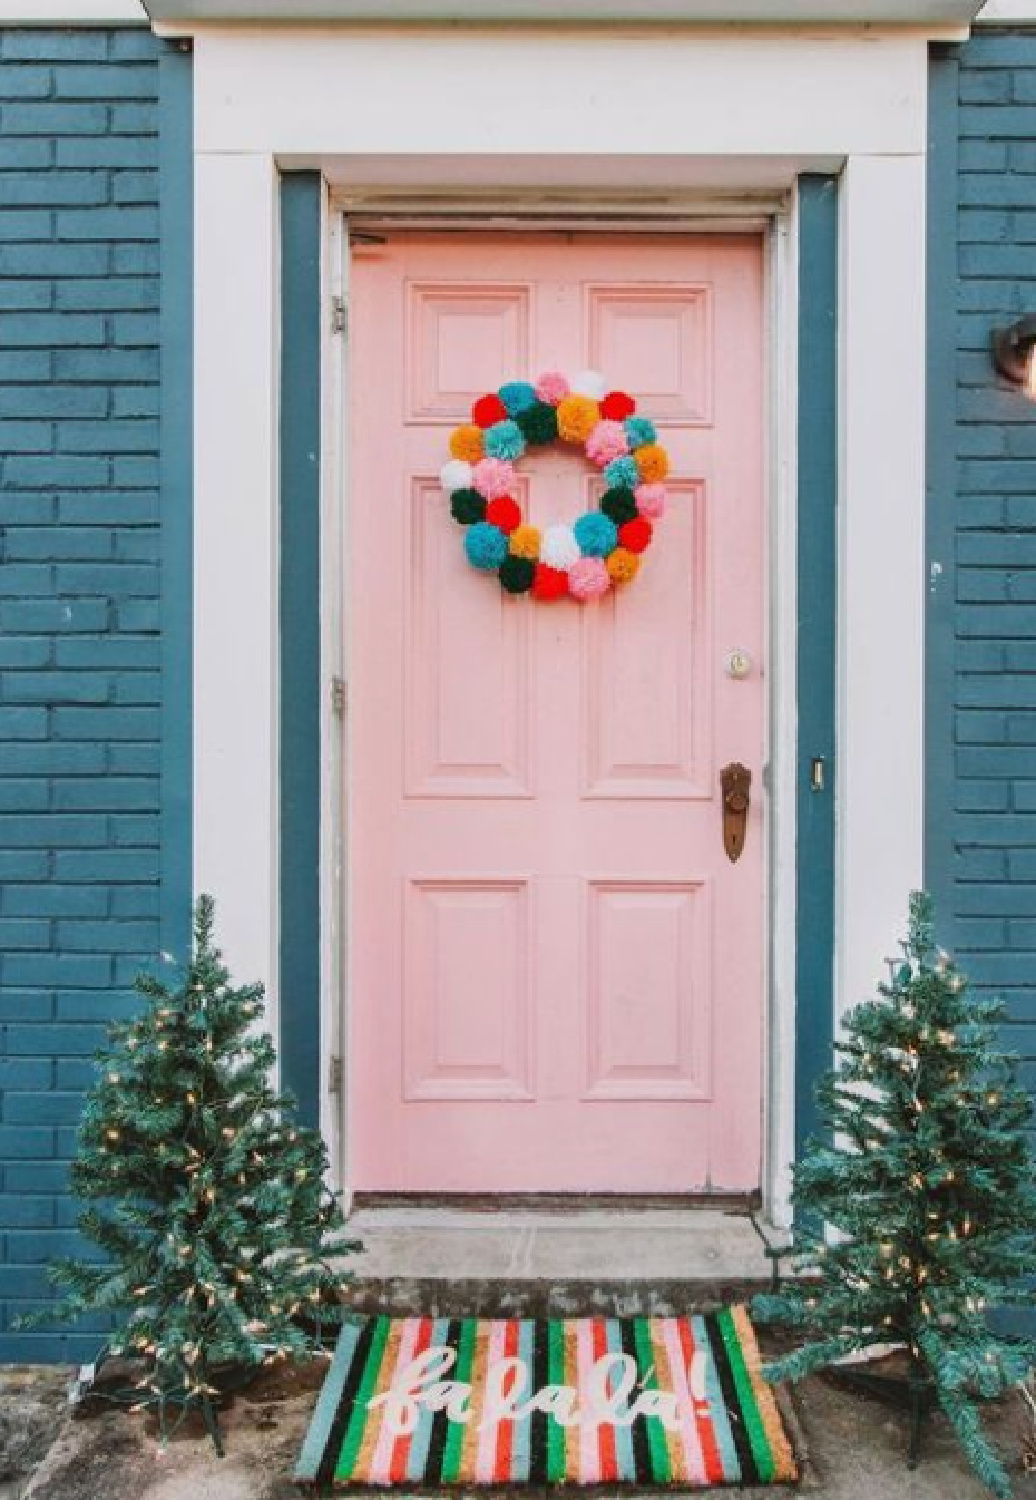 Colorful boho pompom wreath on pink door of blue brick house with striped falala doormat. #christmaswreath #pompomwreath #pinkchristmas